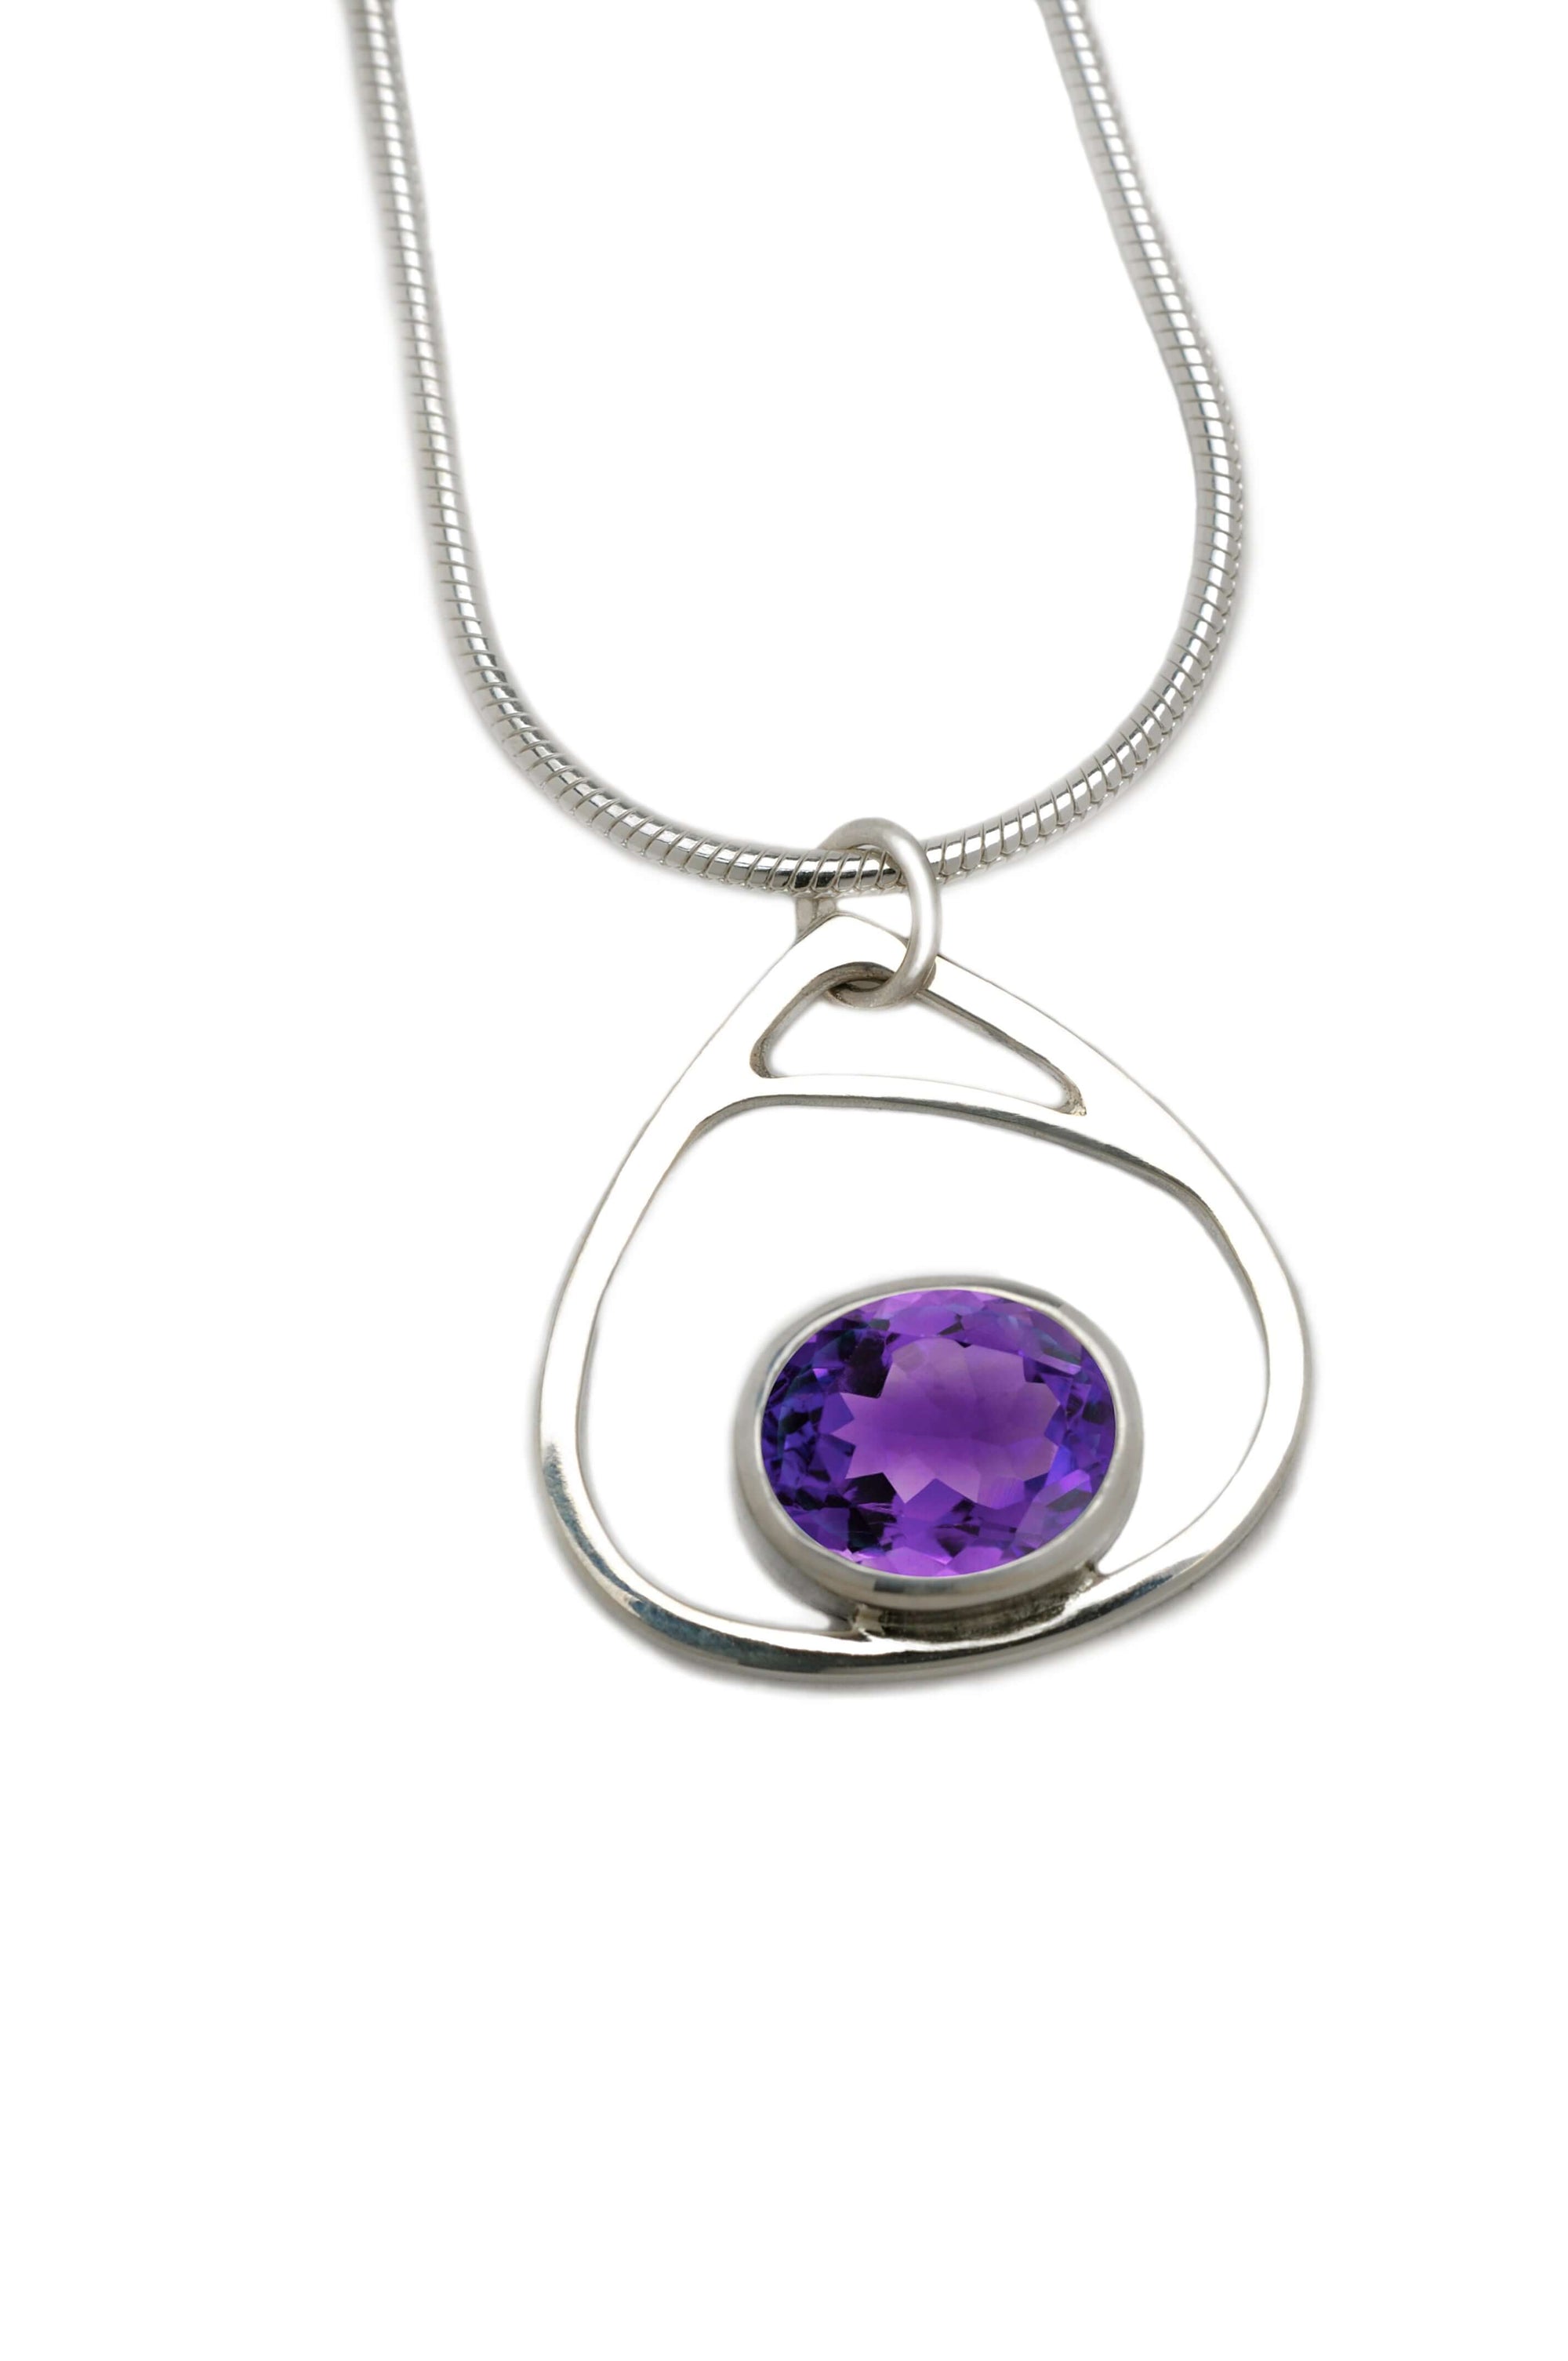 A handmade sterling silver droplet pendant with amethyst gemstone